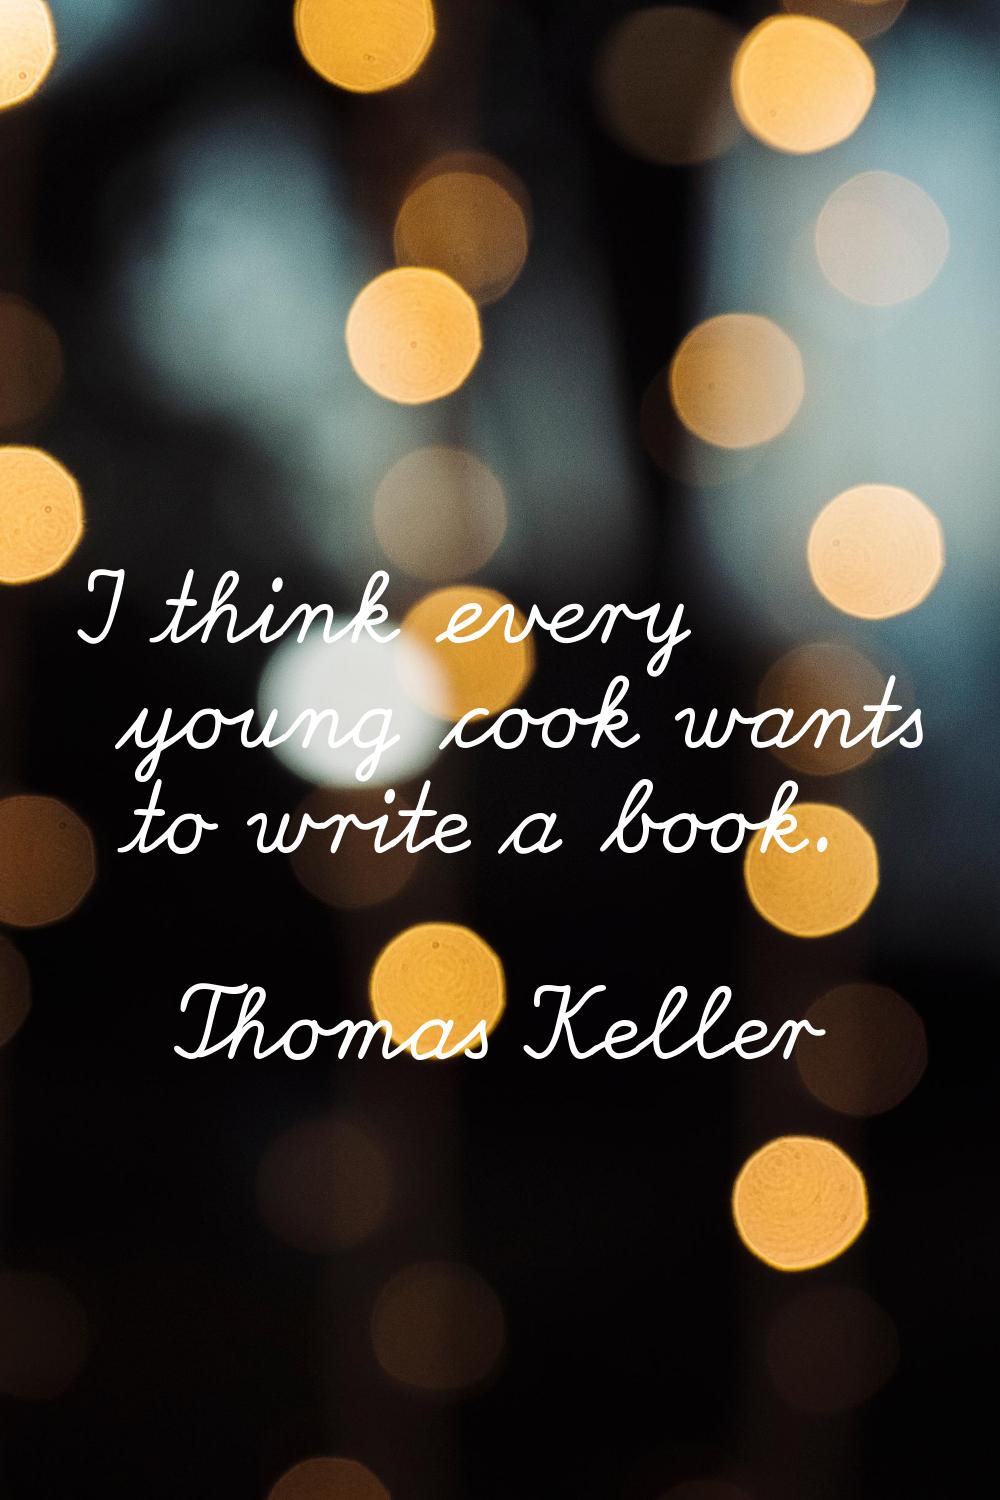 I think every young cook wants to write a book.